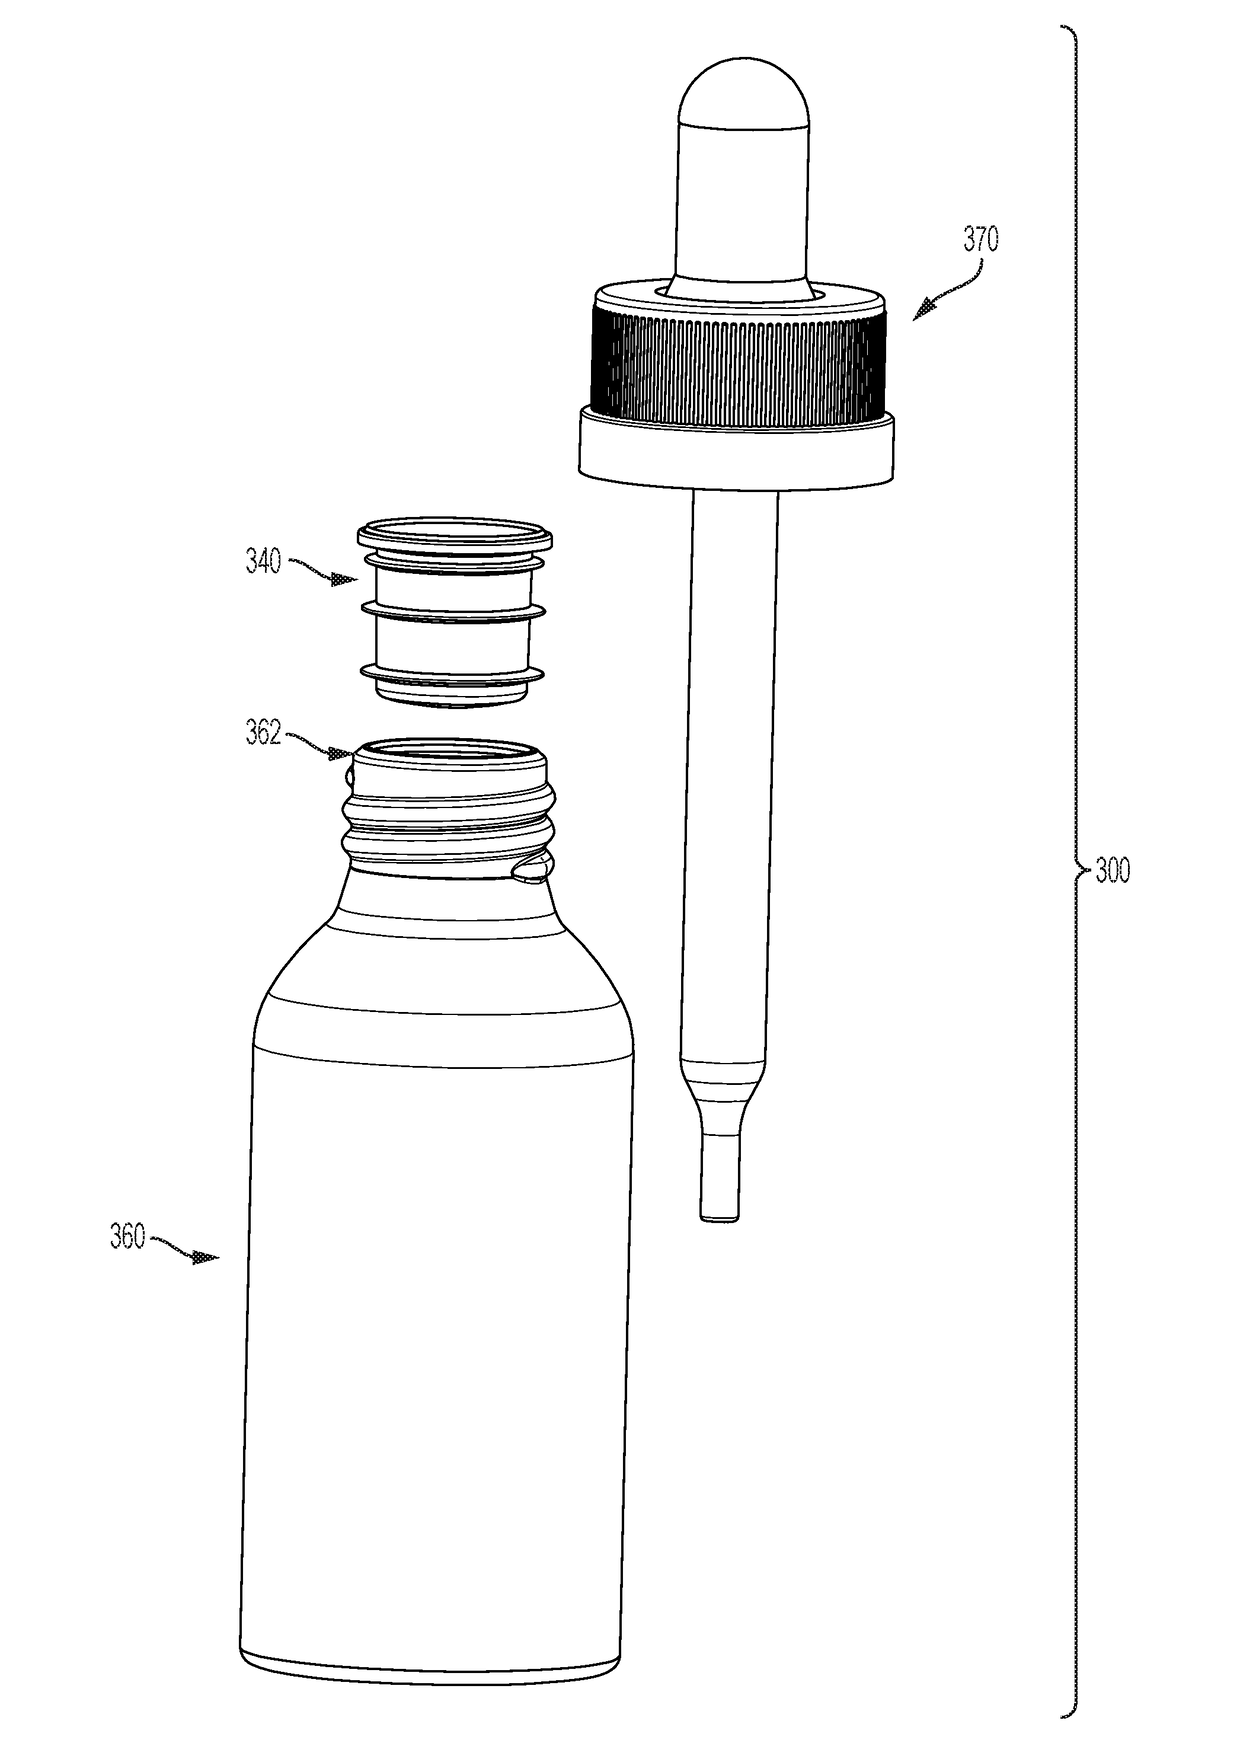 Bottle Neck Insert for Inhibiting Spillage or Accidental Exposure, and Related Methods and Systems